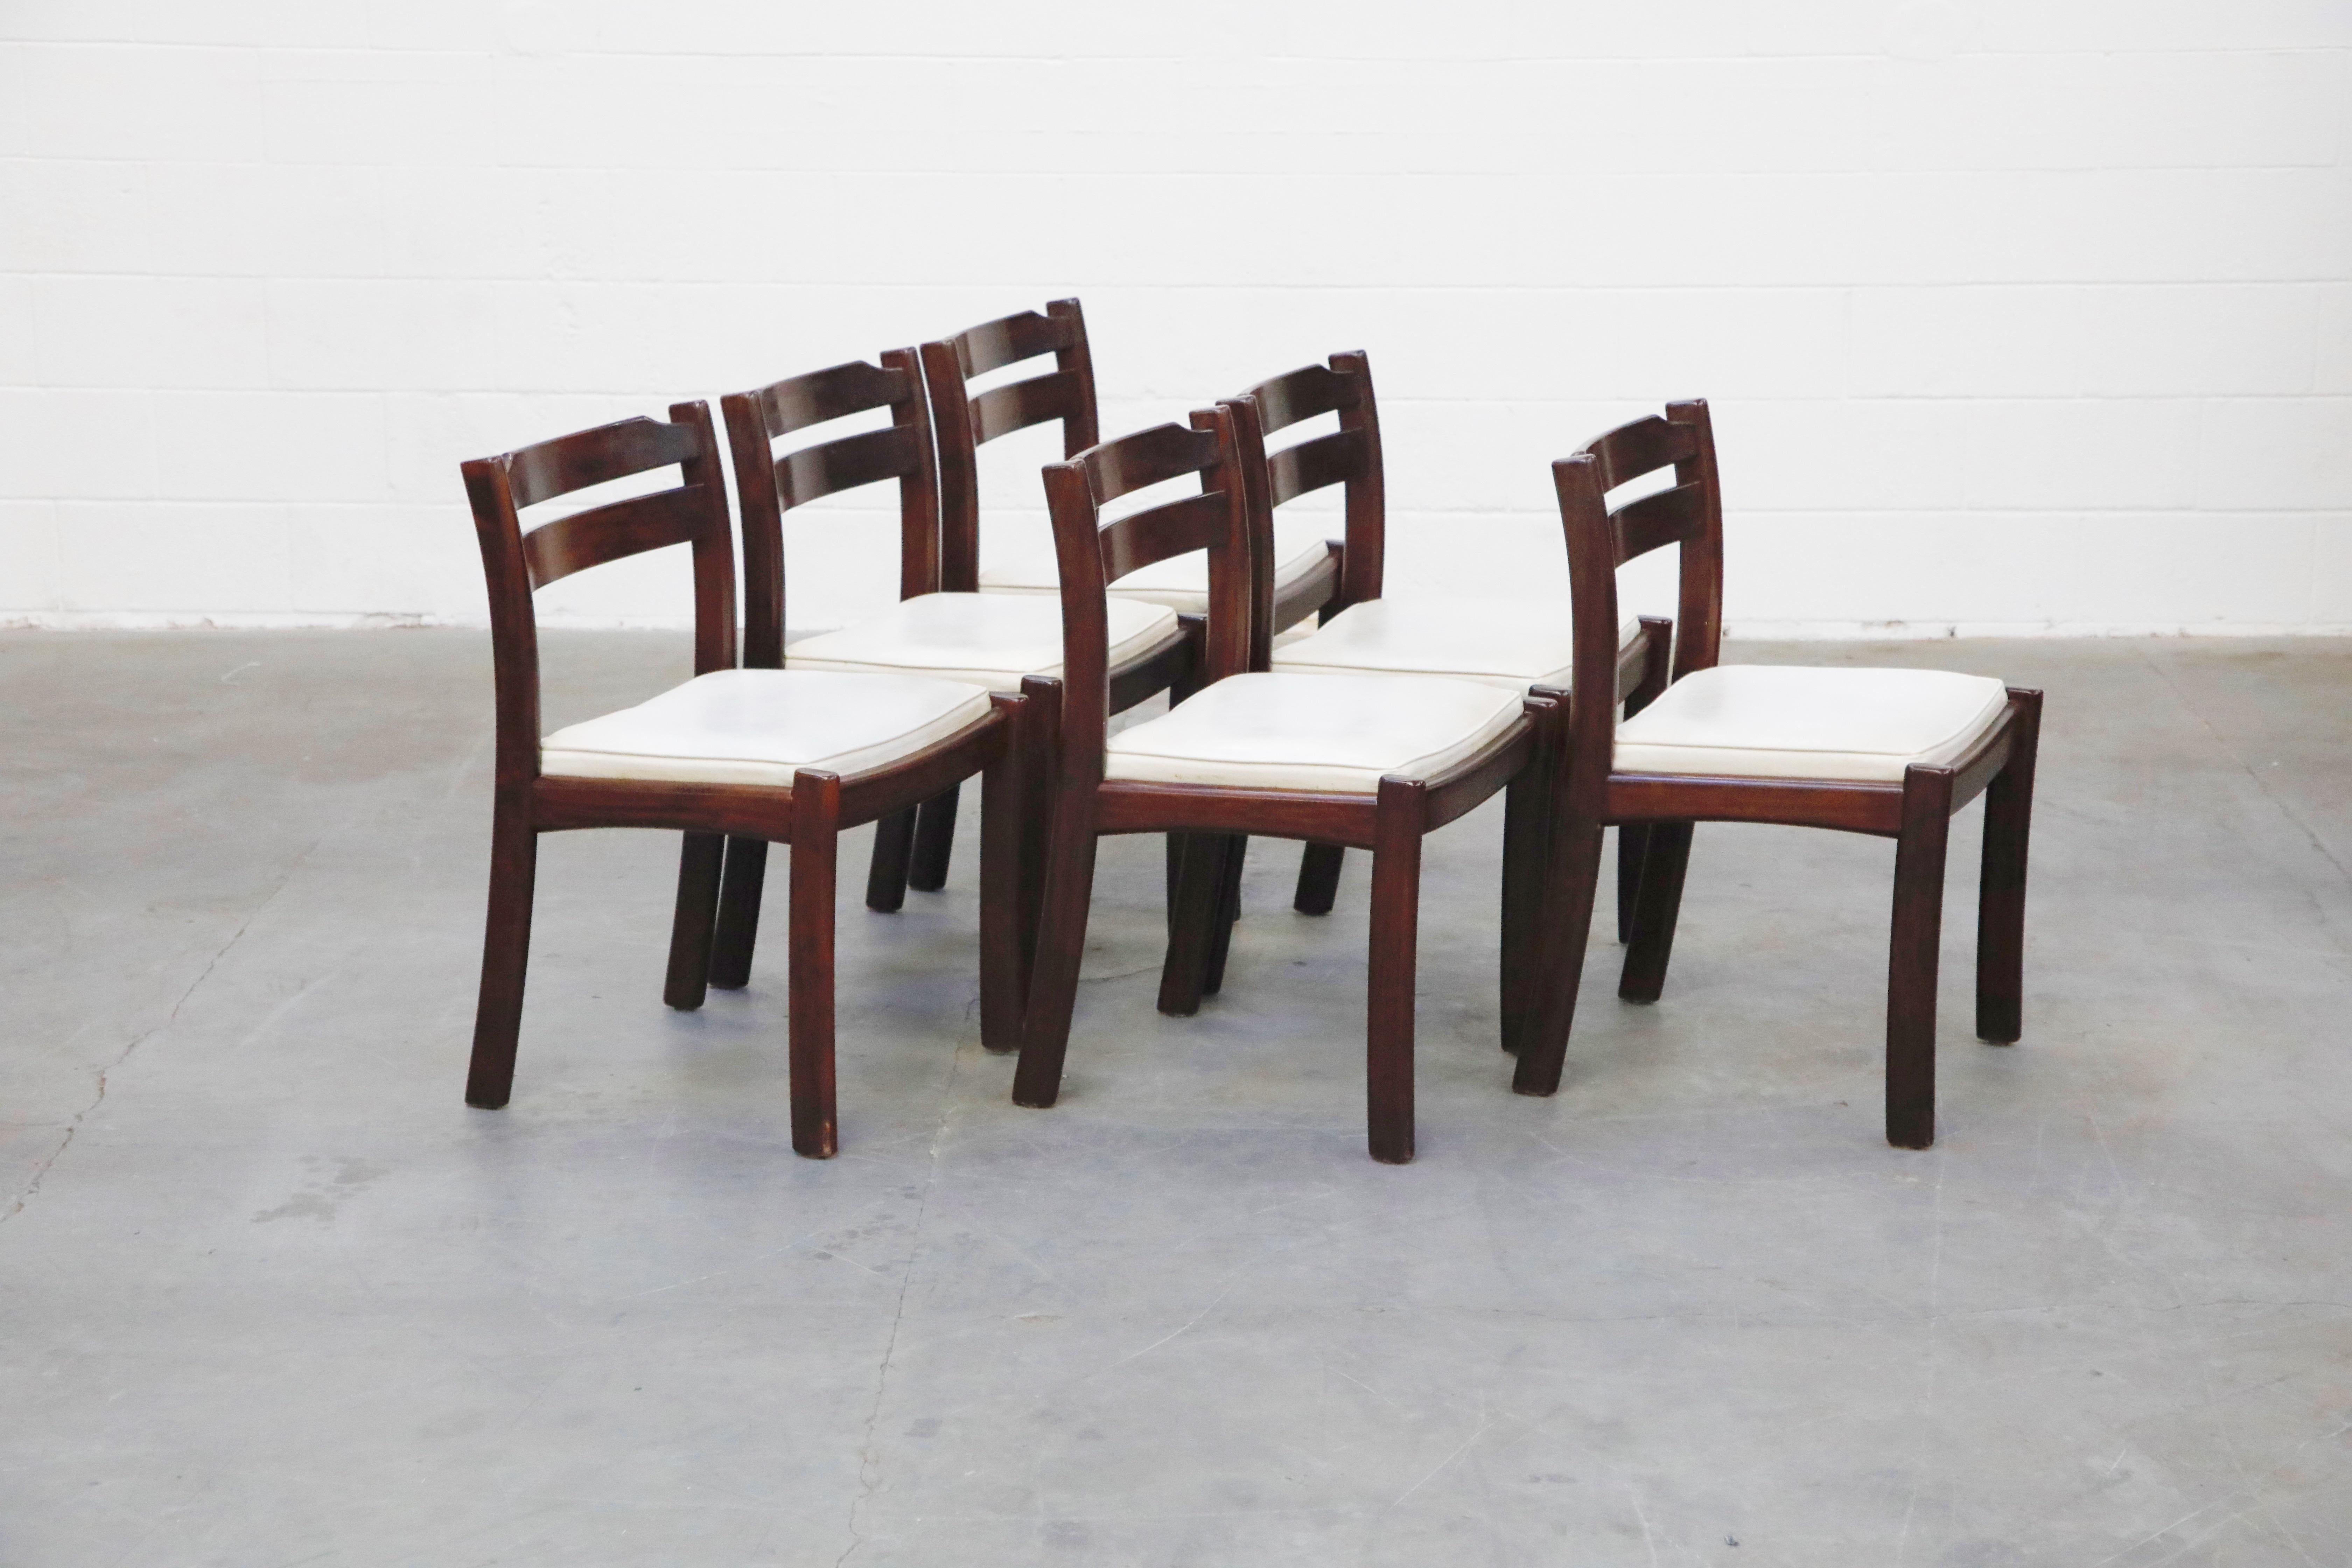 Mid-20th Century Set of Six Danish Modern Rosewood Dining Chairs by Dyrlund, circa 1960s, Signed